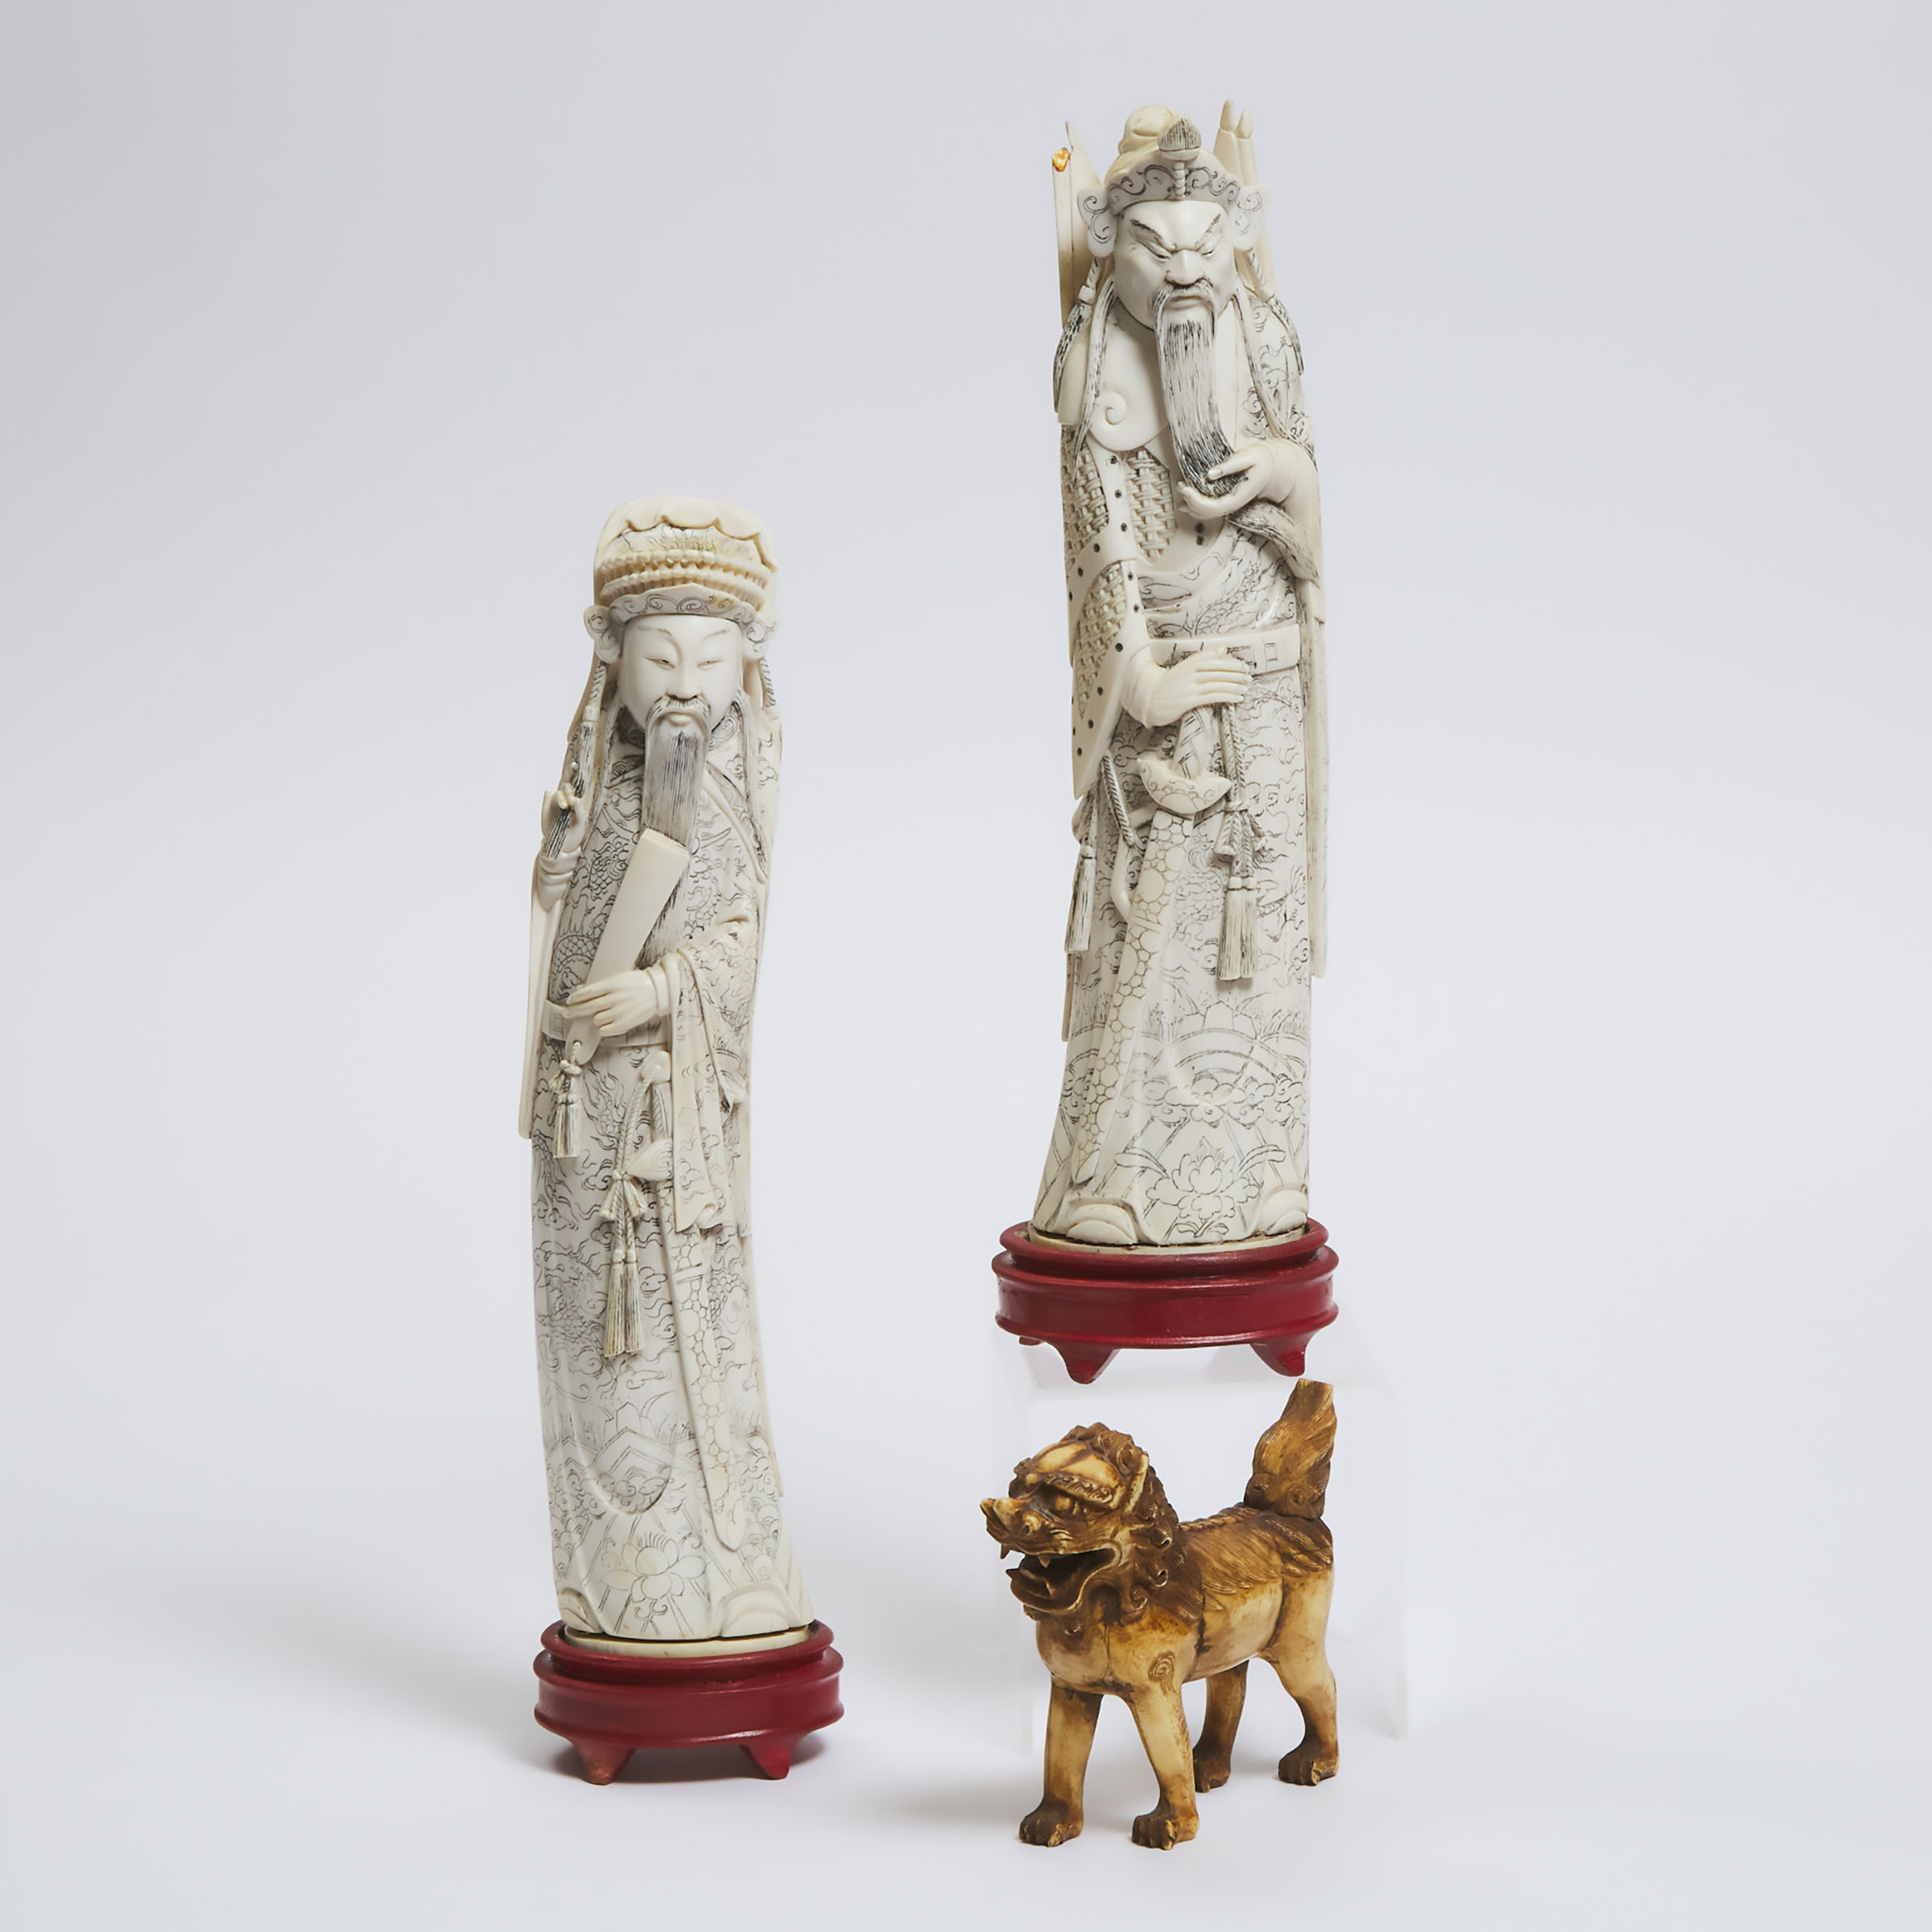 A Pair of Ivory Figures of a General and a Scholar, Together With a Foo Lion, Early to Mid 20th Century